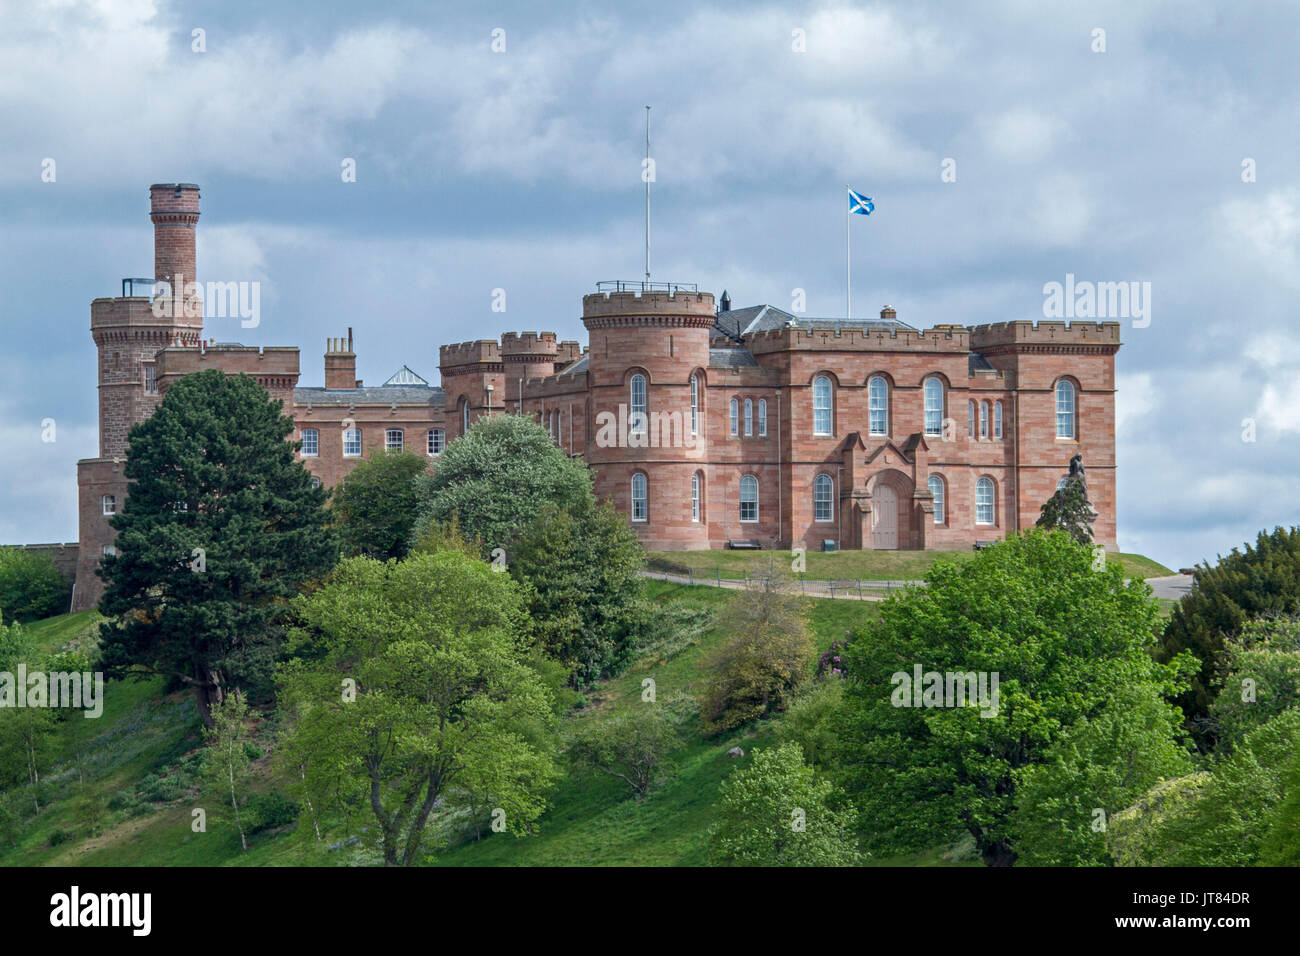 Inverness castle, an imposing red sandstone building on a hilltop overlooking the city of Inverness and the River Ness, Scotland Stock Photo